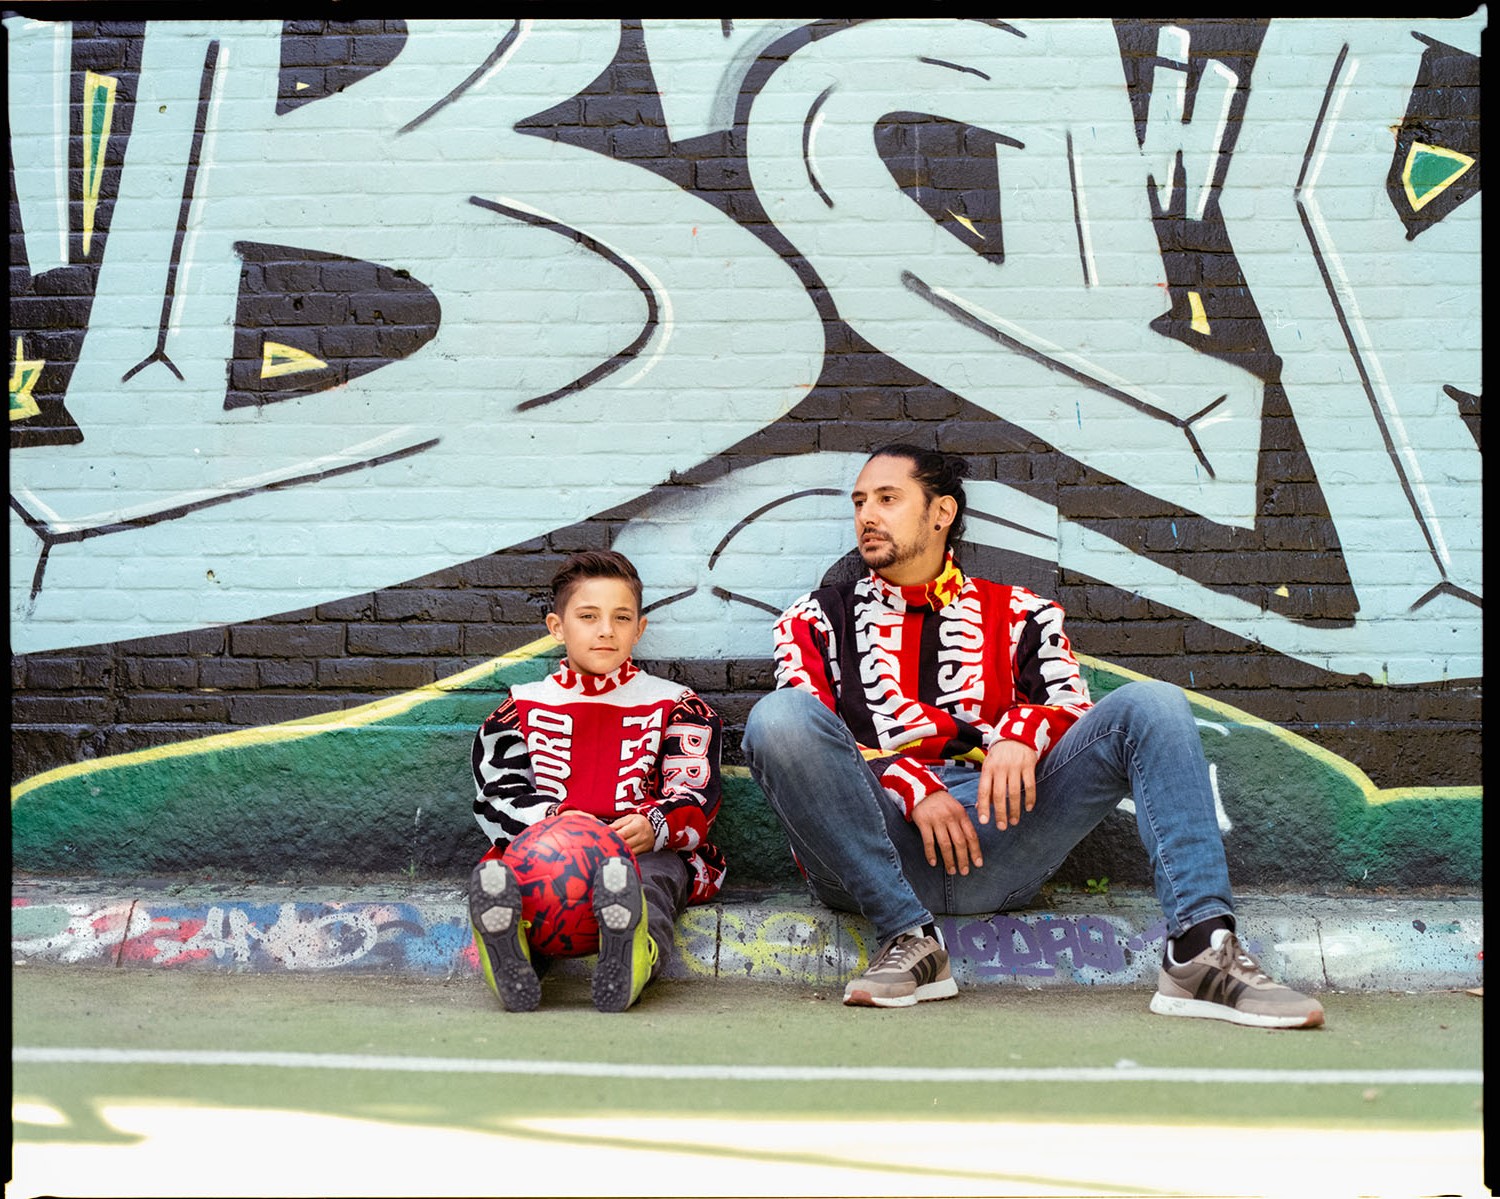 Man and kid posing against wall wearing different colored together sweaters